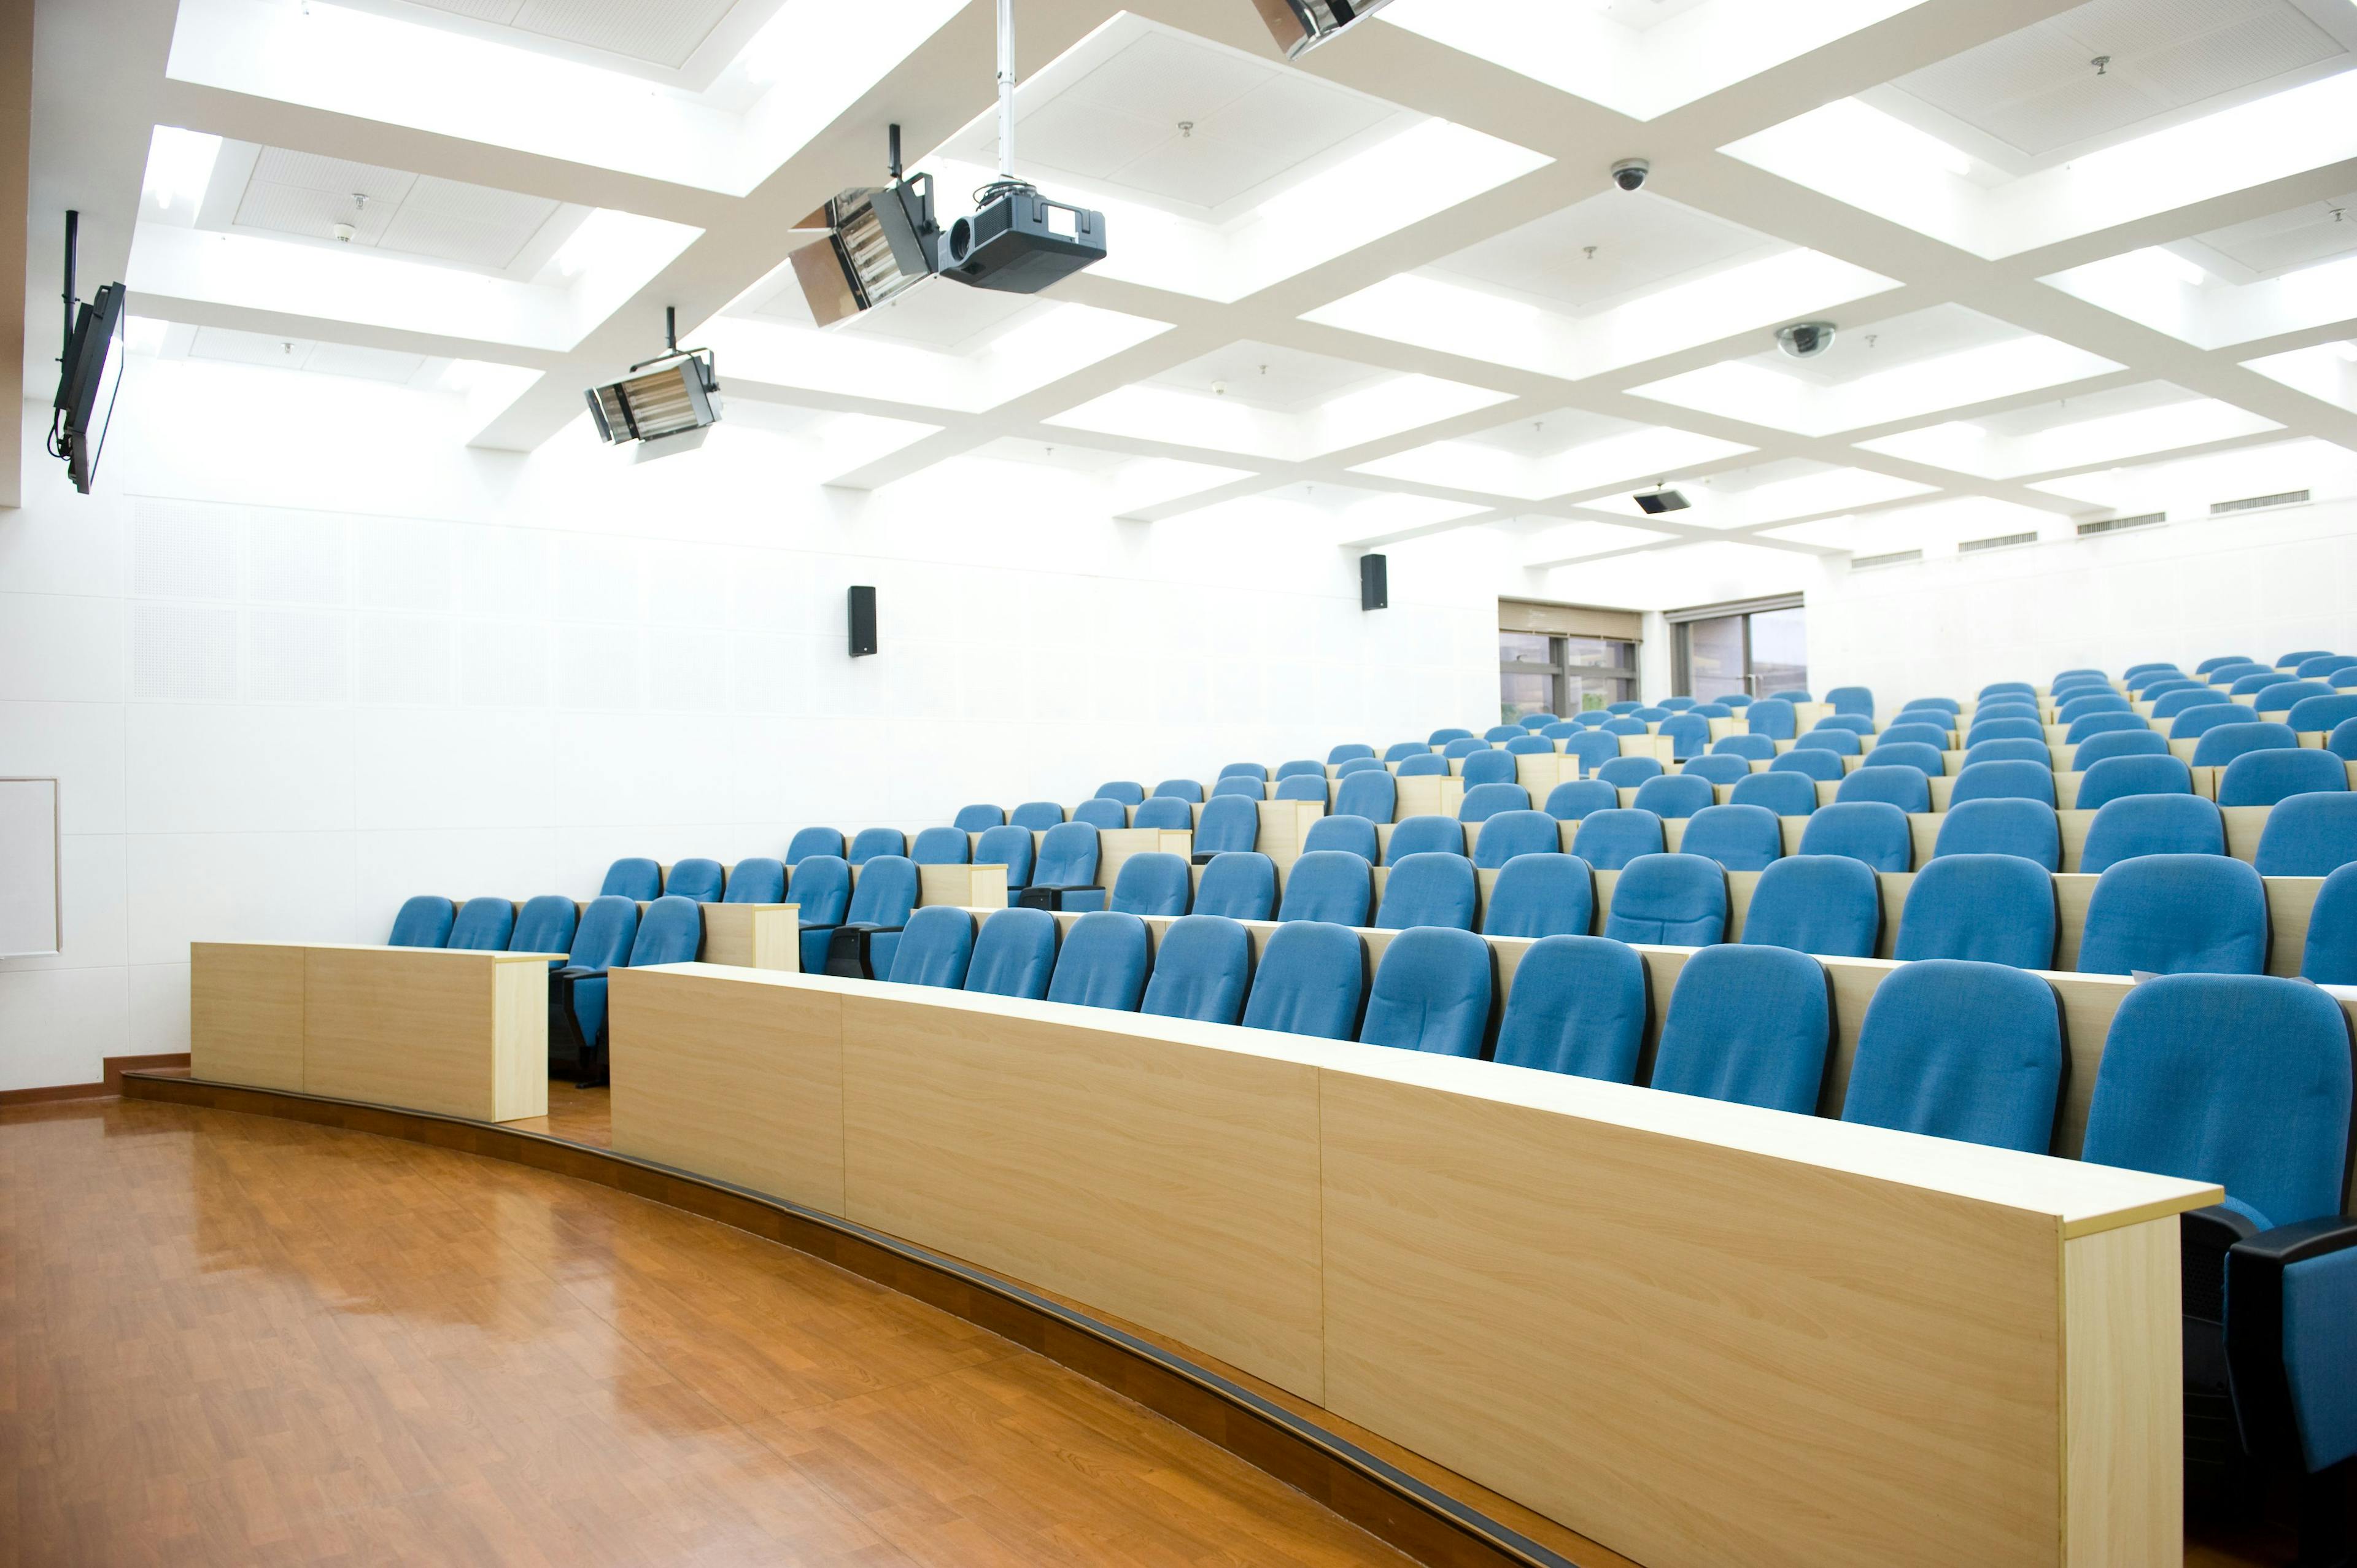 empty lecture hall | Image Credit: © xy - stock.adobe.com